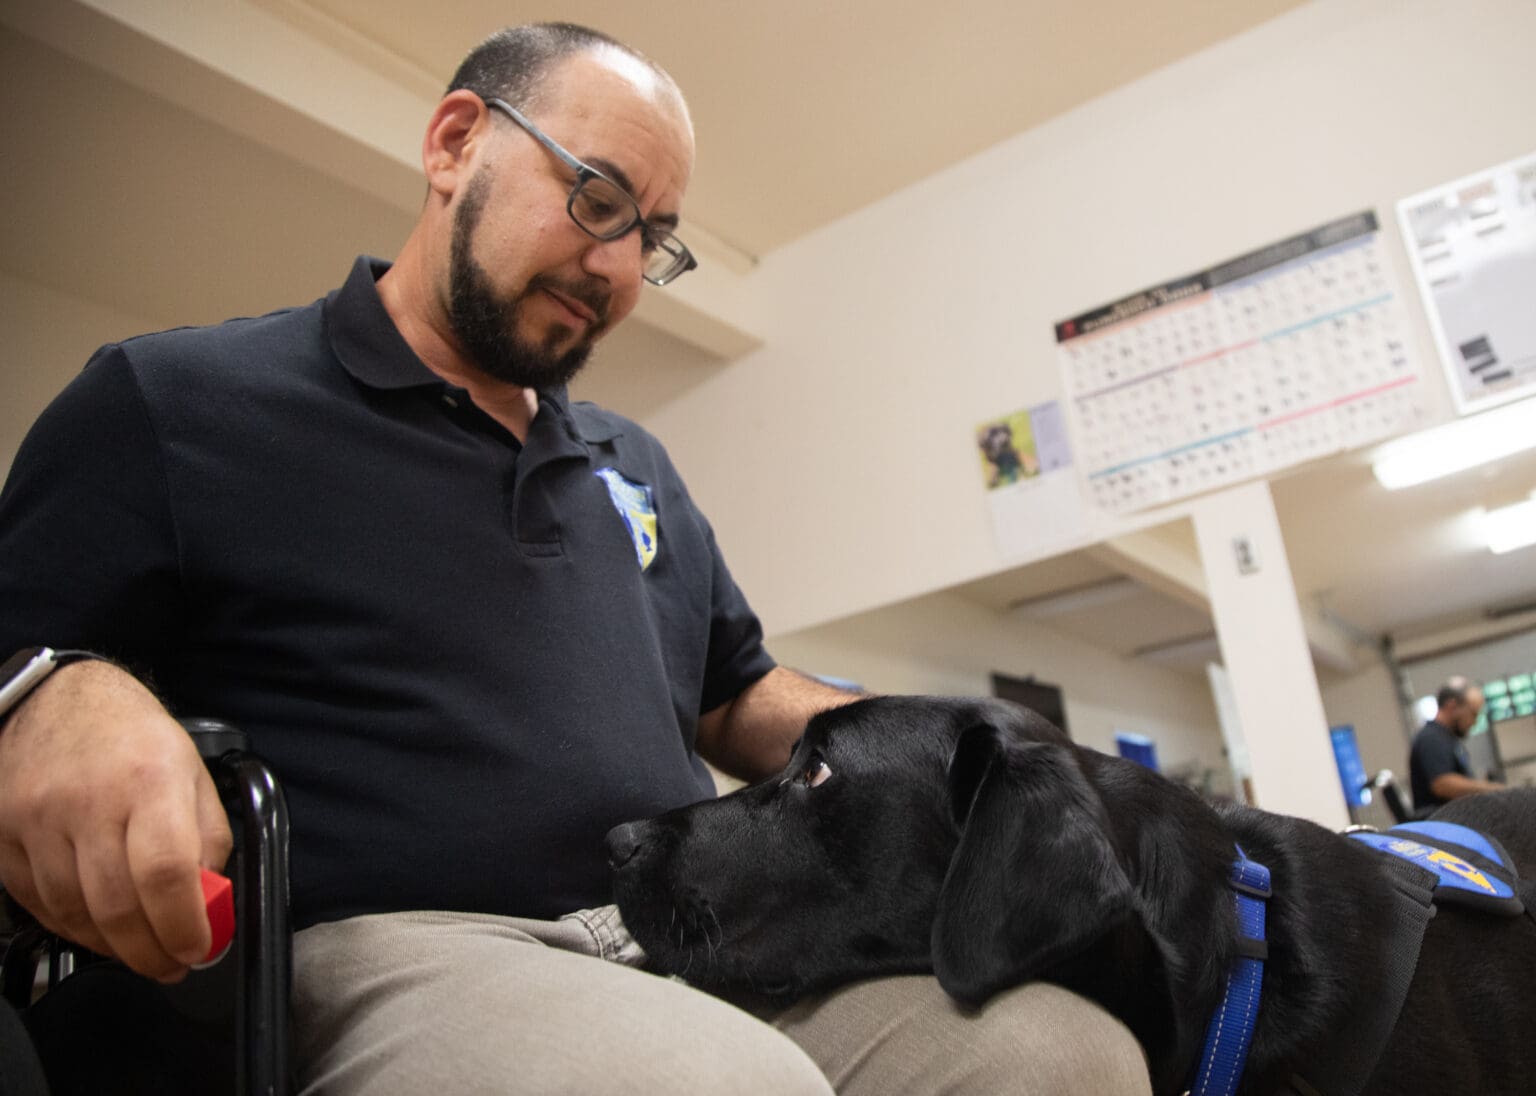 Ace follows the "visit" cue and places his head on trainer Shawn Crincoli's lap at the Brigadoon Service Dogs training facility in Bellingham on Tuesday